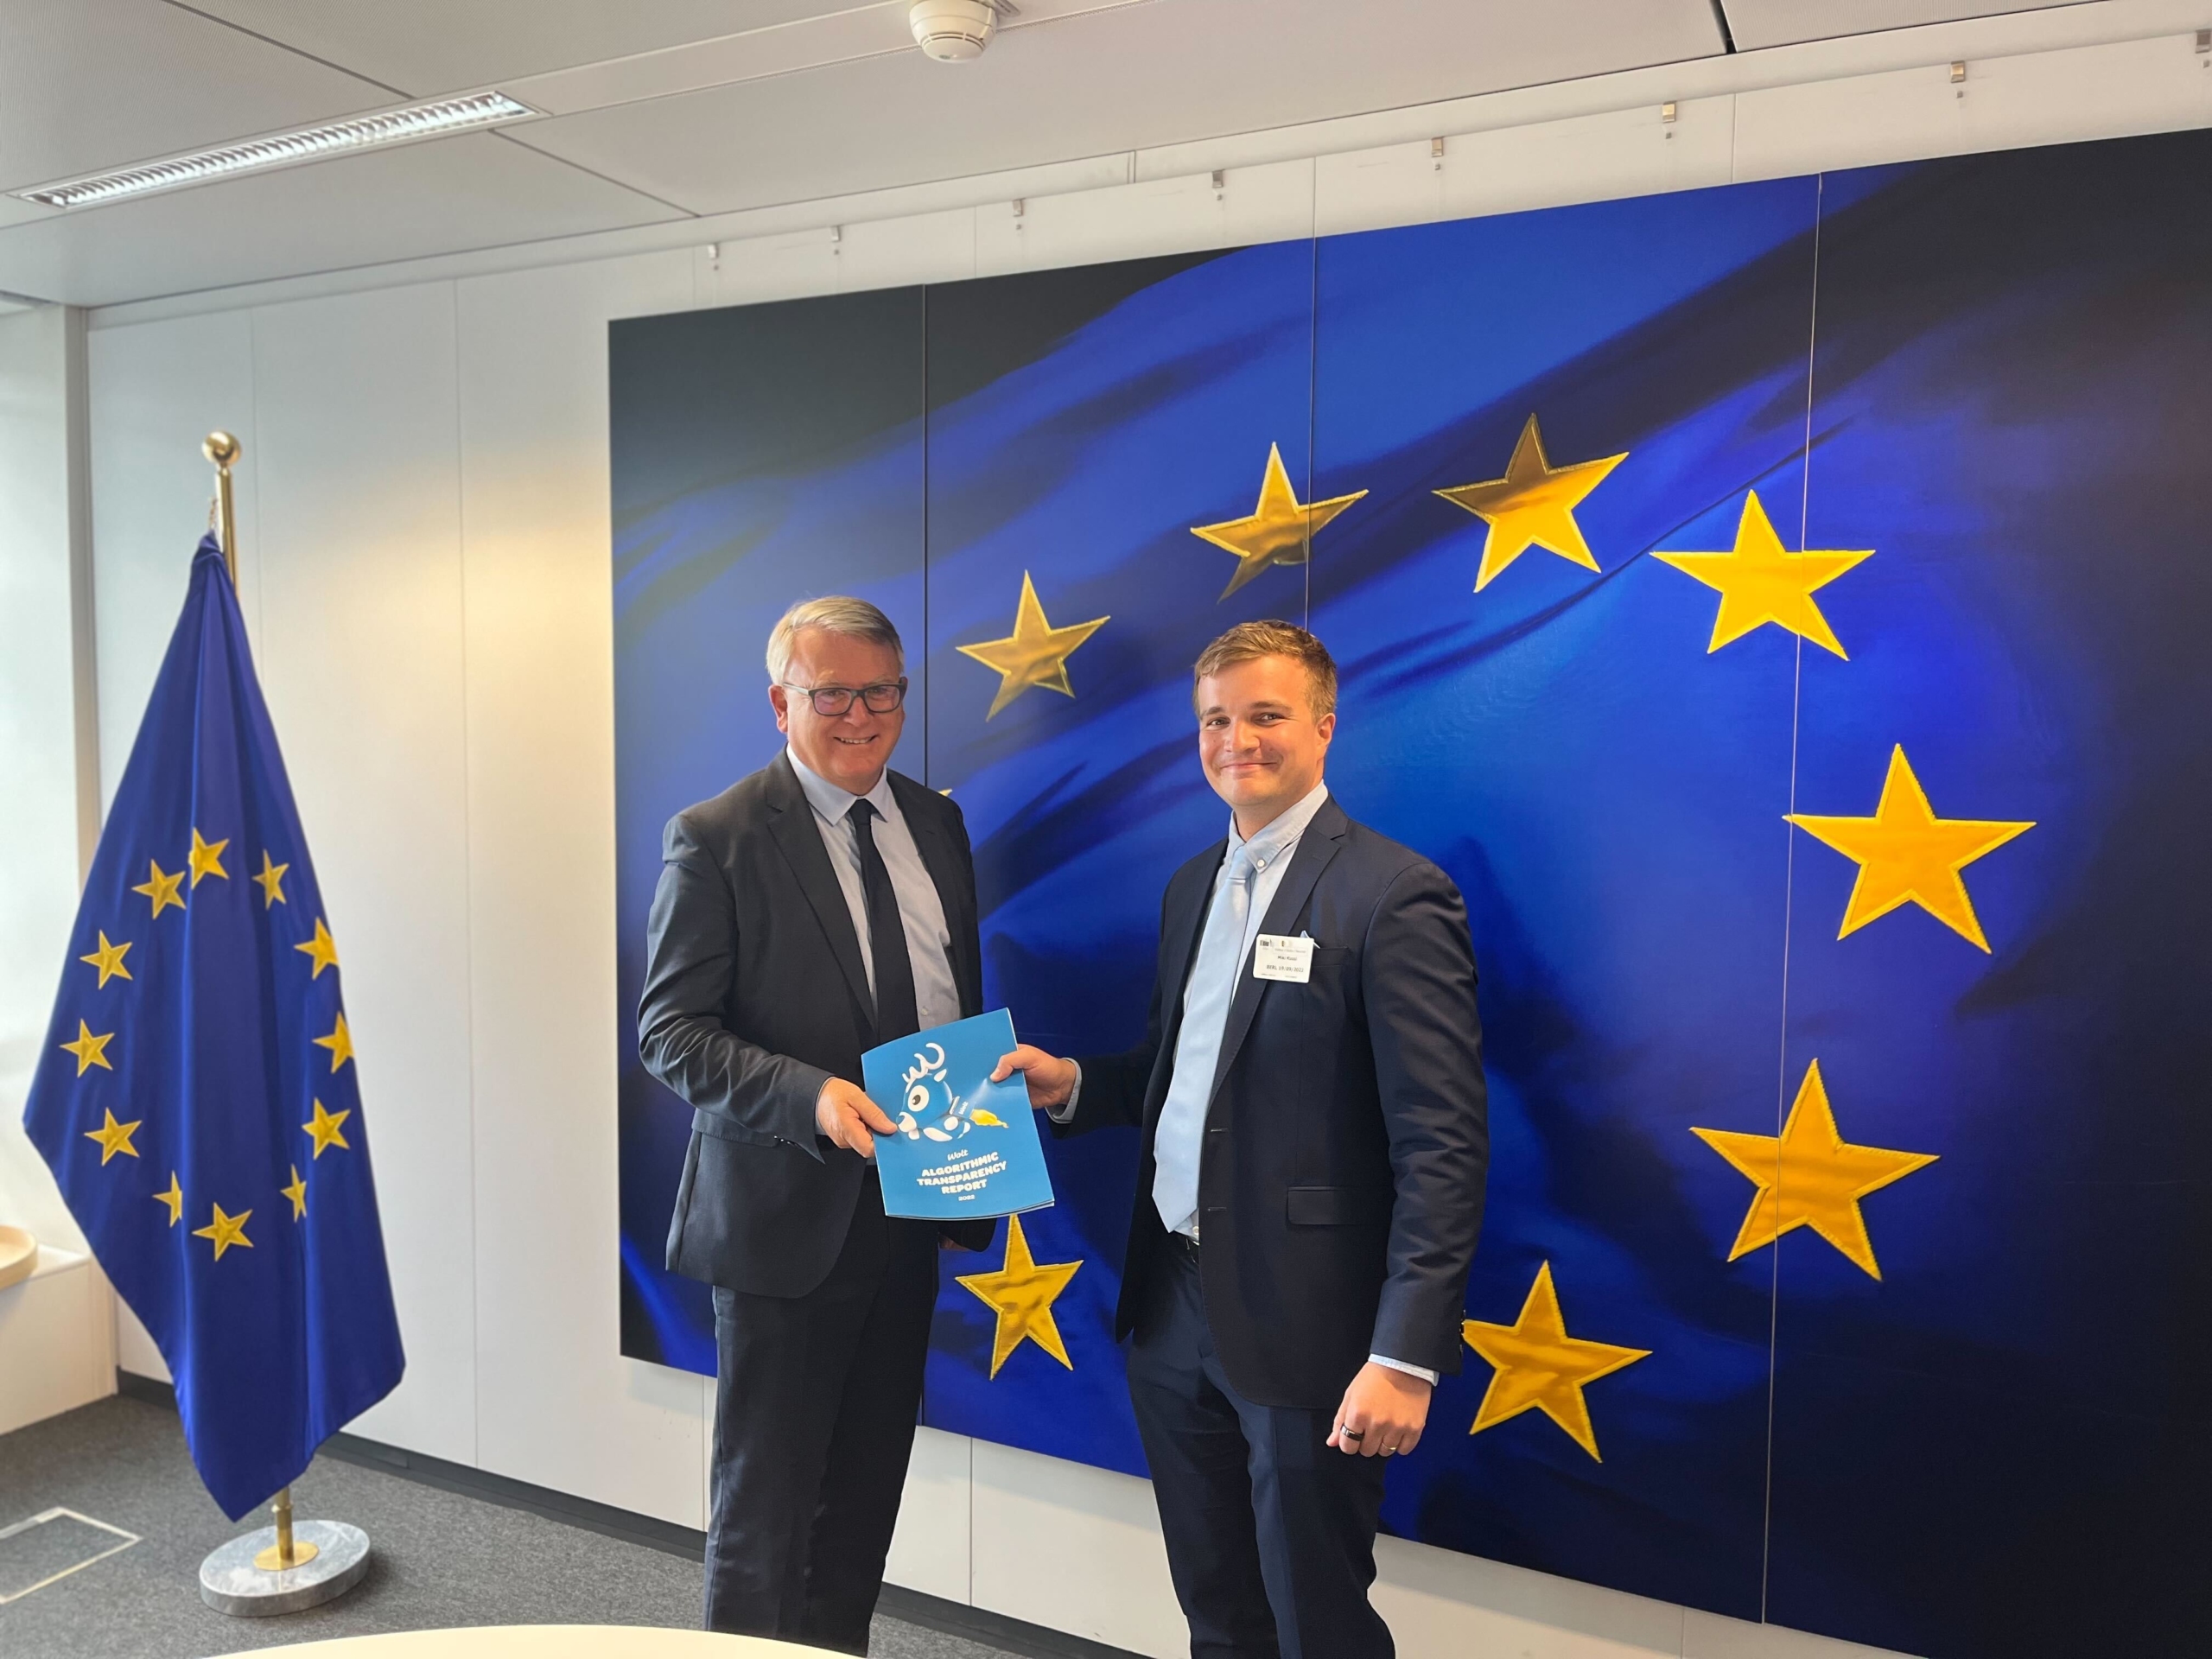 Our CEO Miki Kuusi handing over the Wolt Algorithmic Transparency Report to EU Commissioner for Jobs and Social Rights Nicolas Schmit.